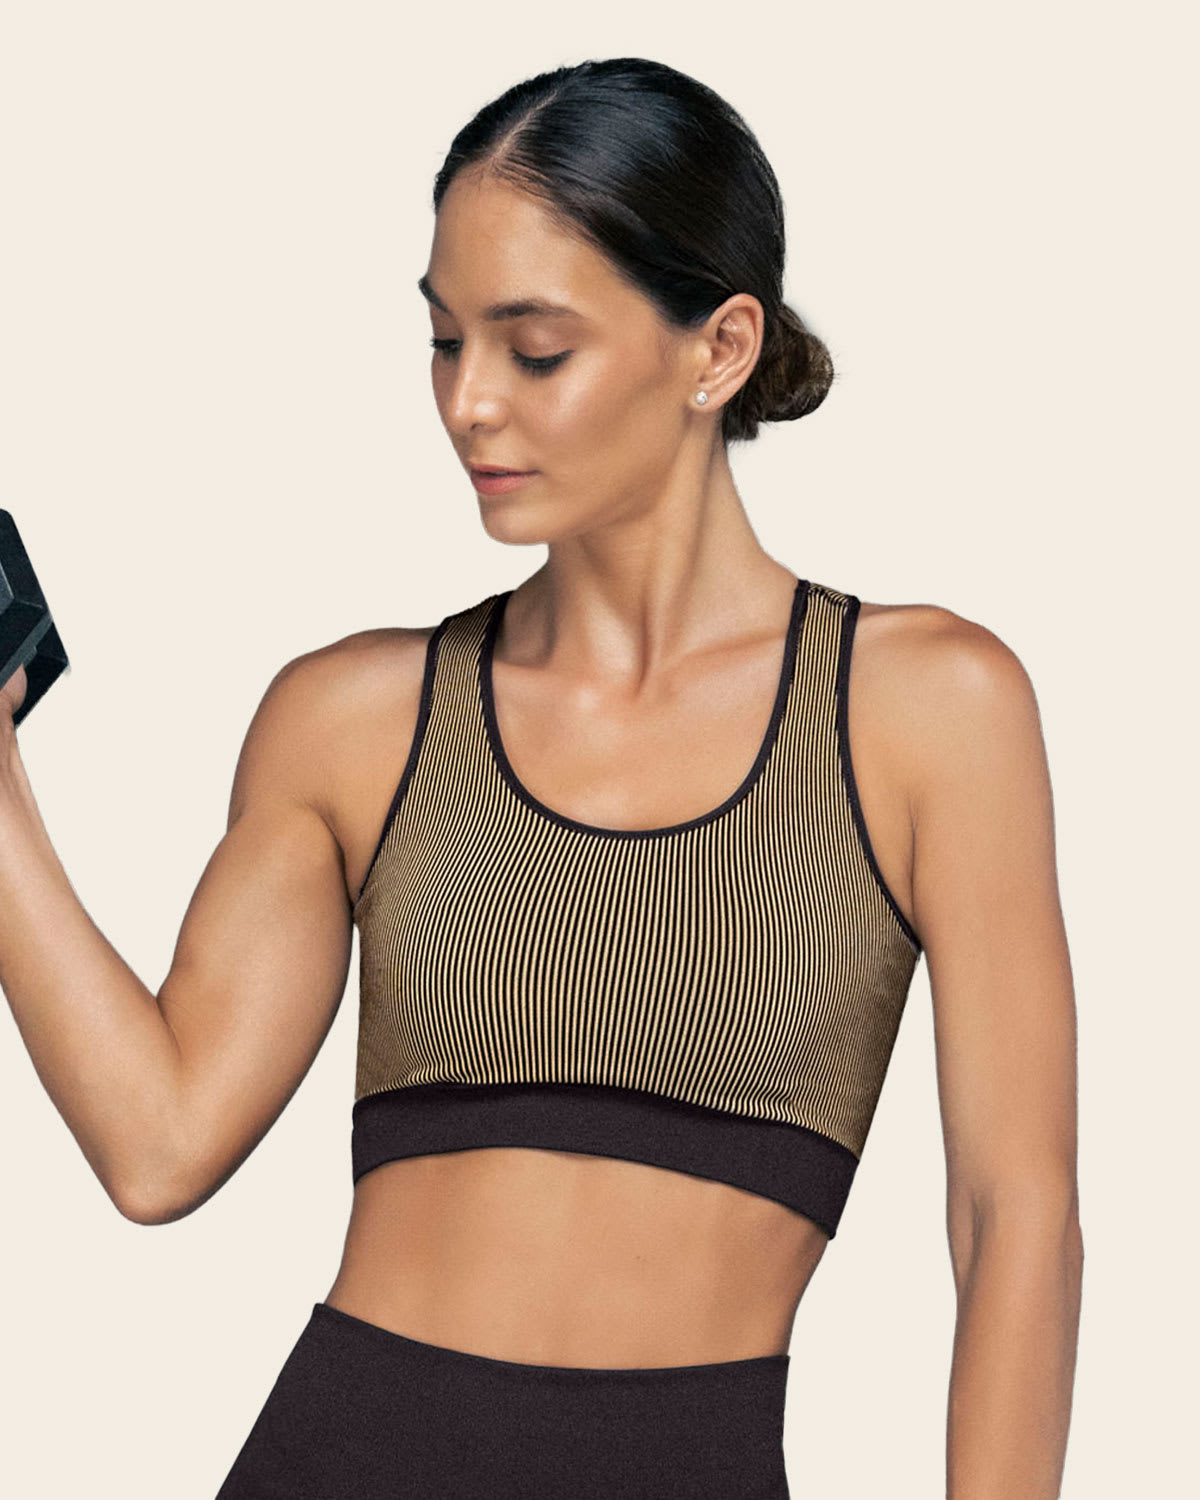 $25 - $50 Padded Cups Sports Bras.